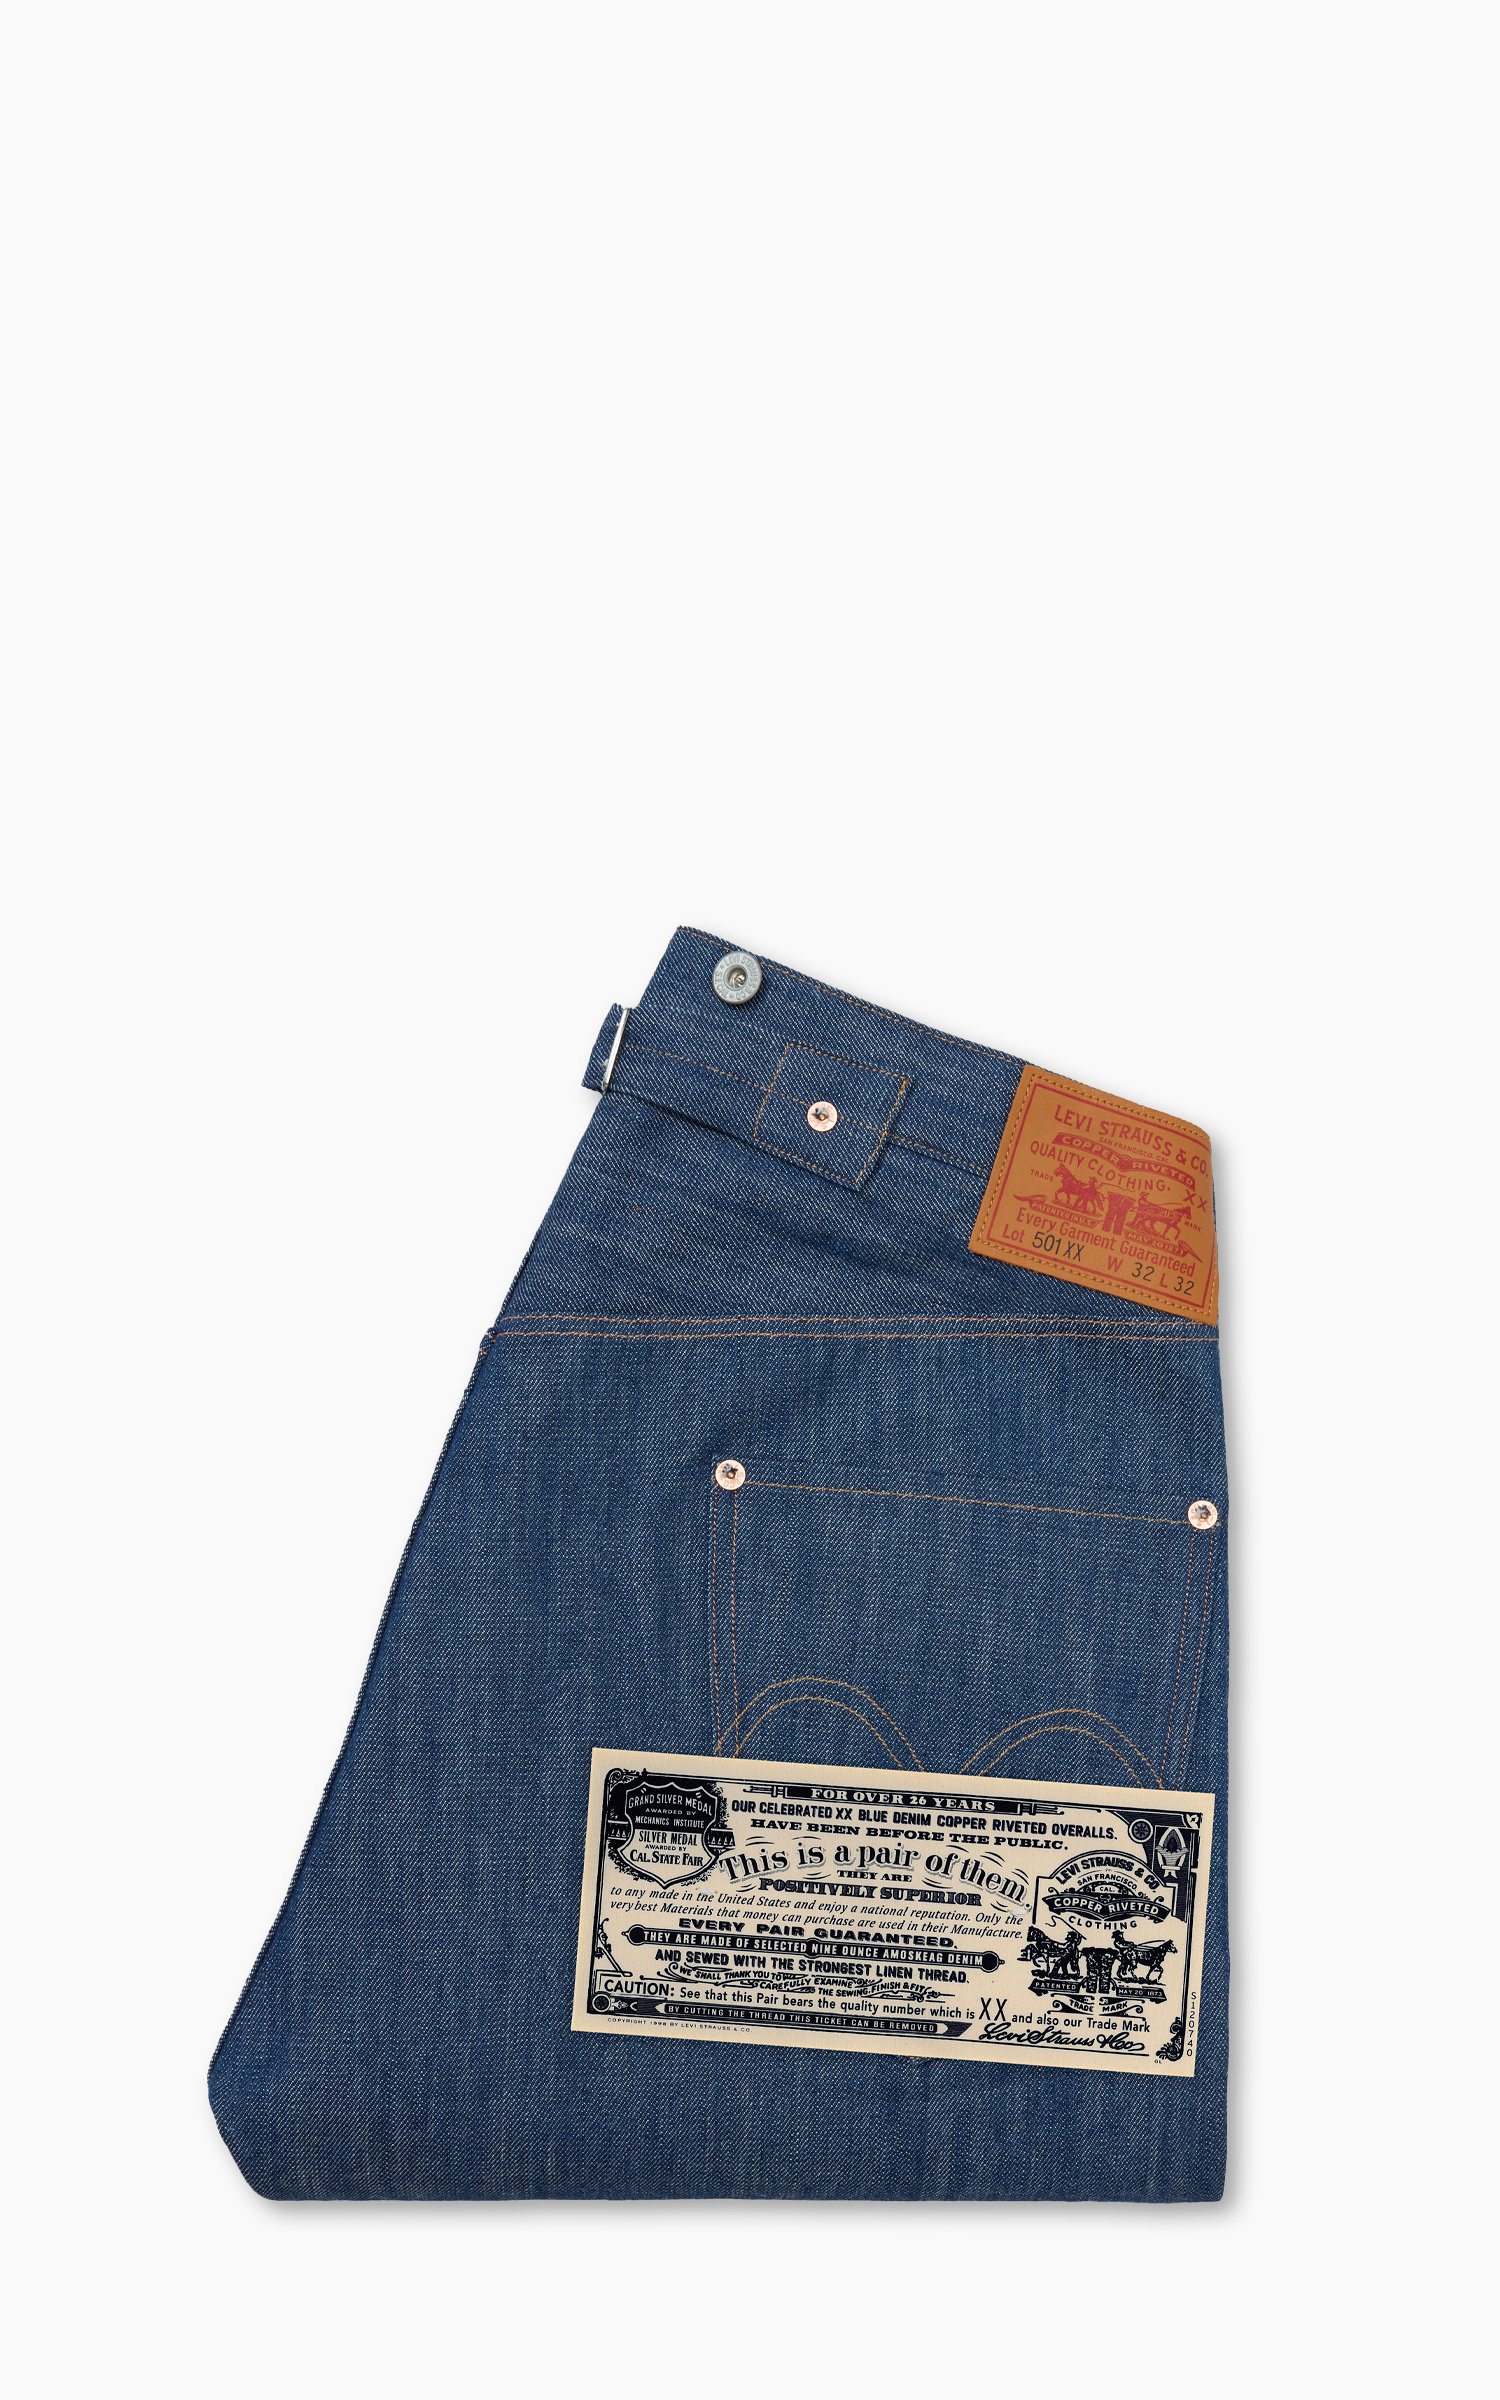 Levi's® Vintage Clothing 1901 501 Jeans Cone Mills Limited Edition ...